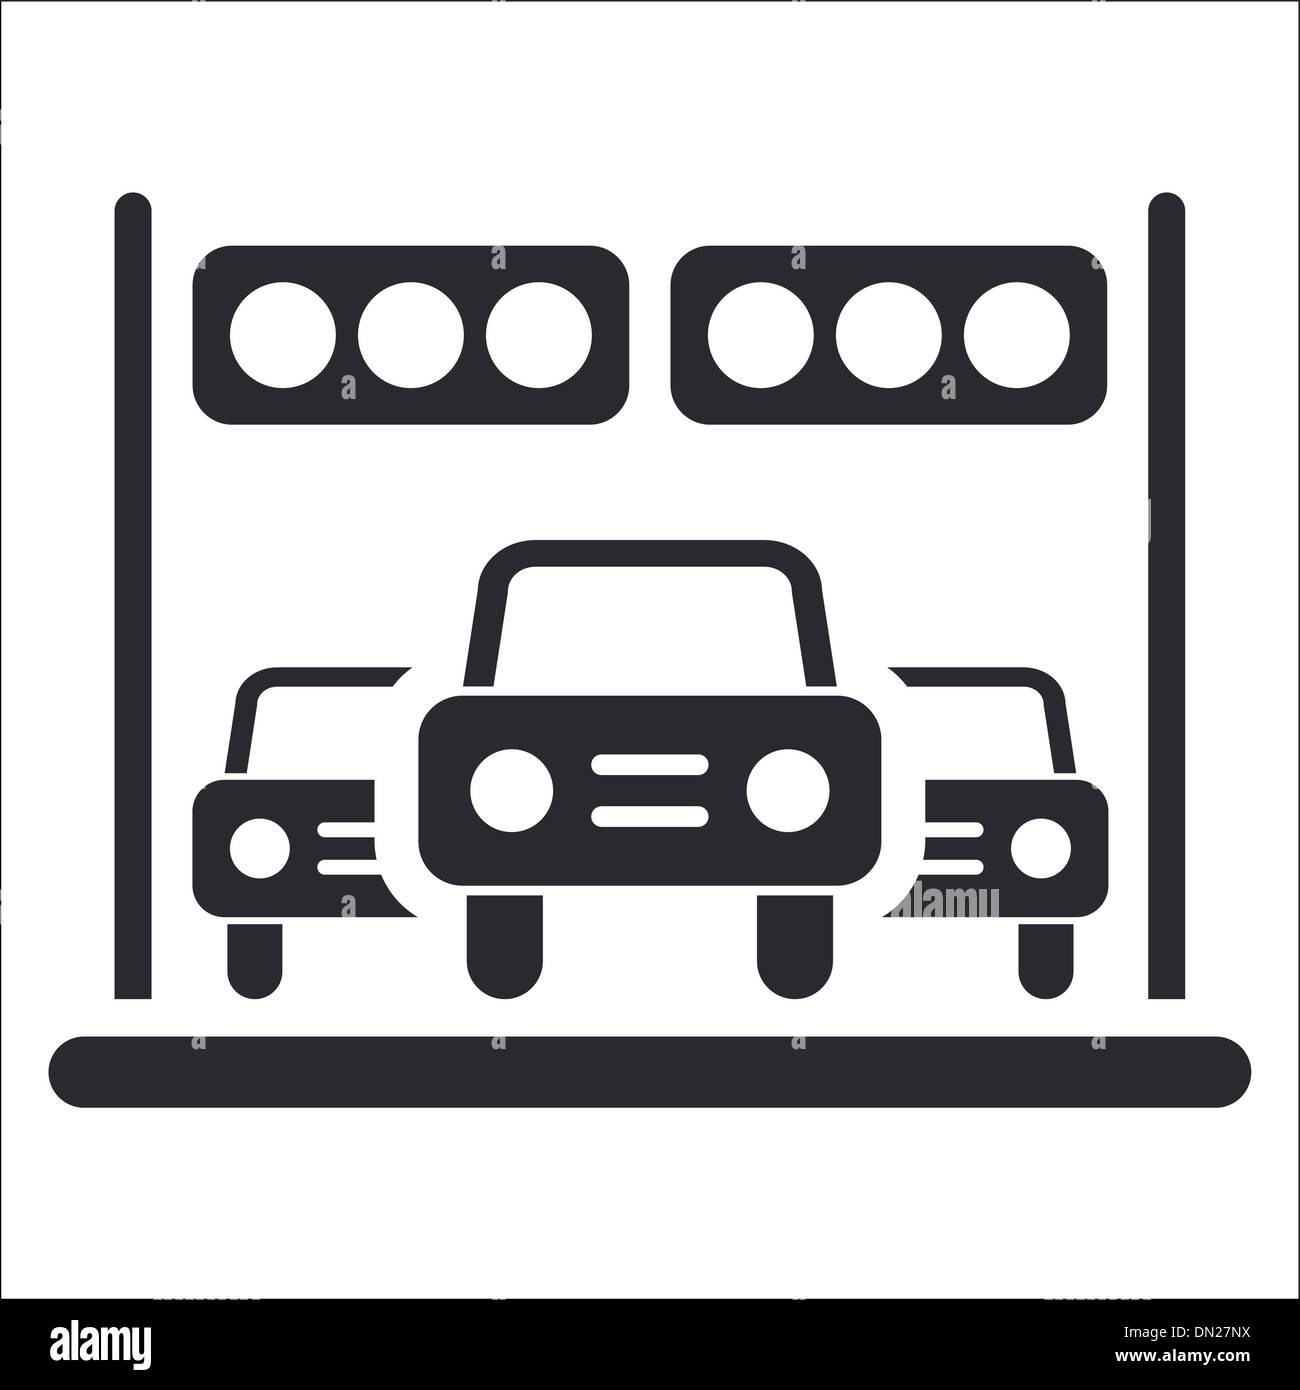 Vector illustration of single arrival race icon Stock Vector